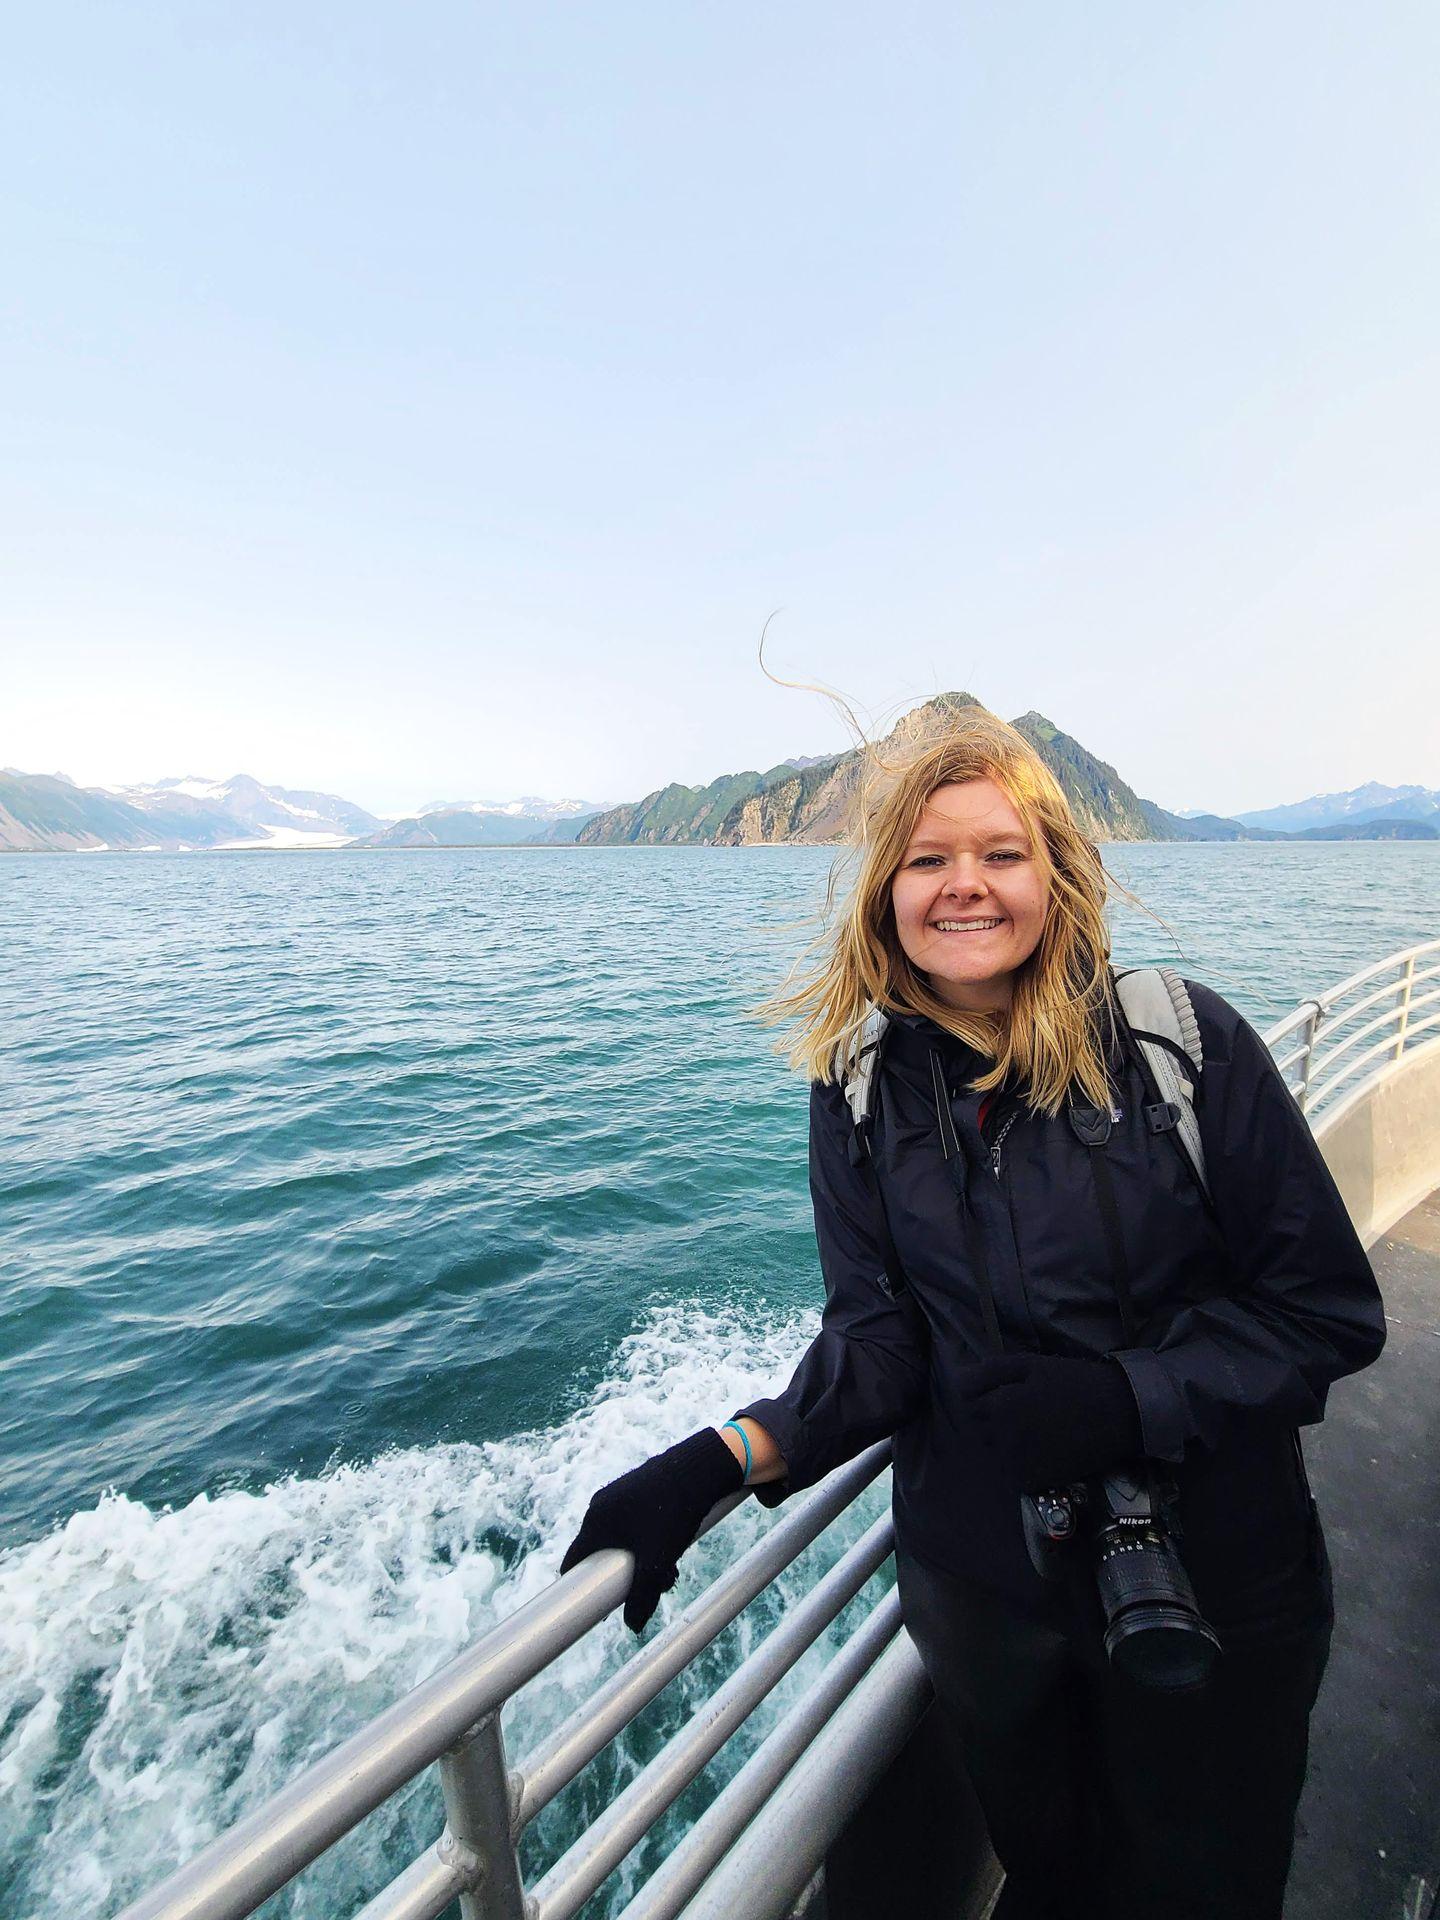 Lydia on a boat during the boat ride from Resurrection Bay in Kenai Fjords.